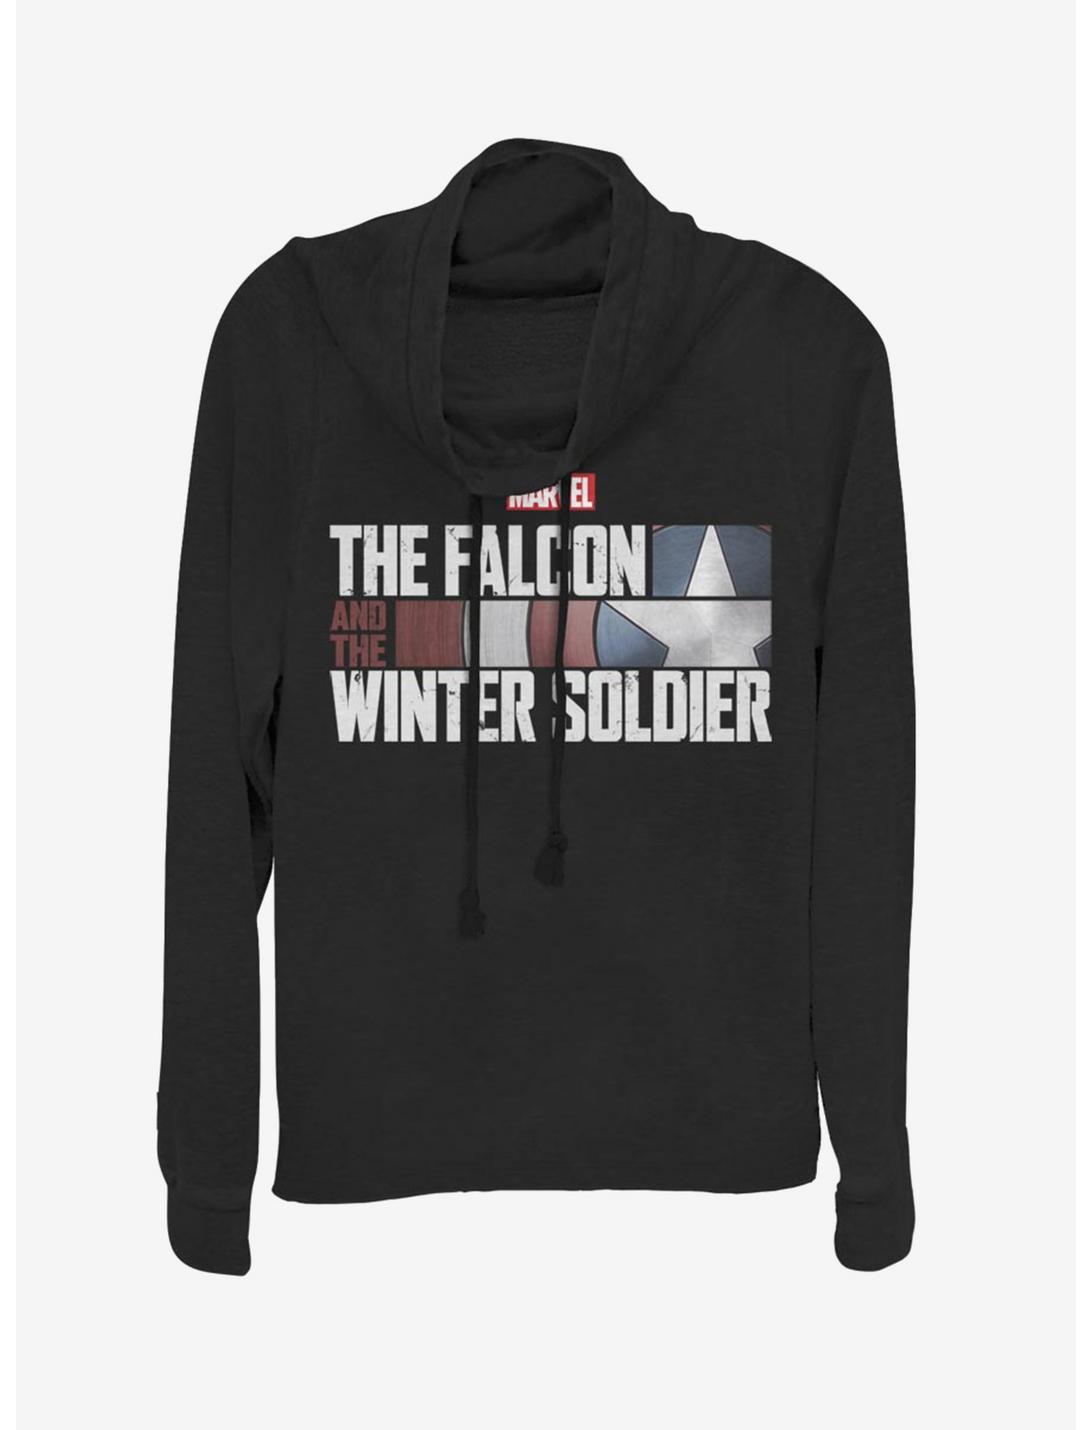 Marvel The Falcon And The Winter Soldier Cowlneck Long-Sleeve Womens Top, BLACK, hi-res